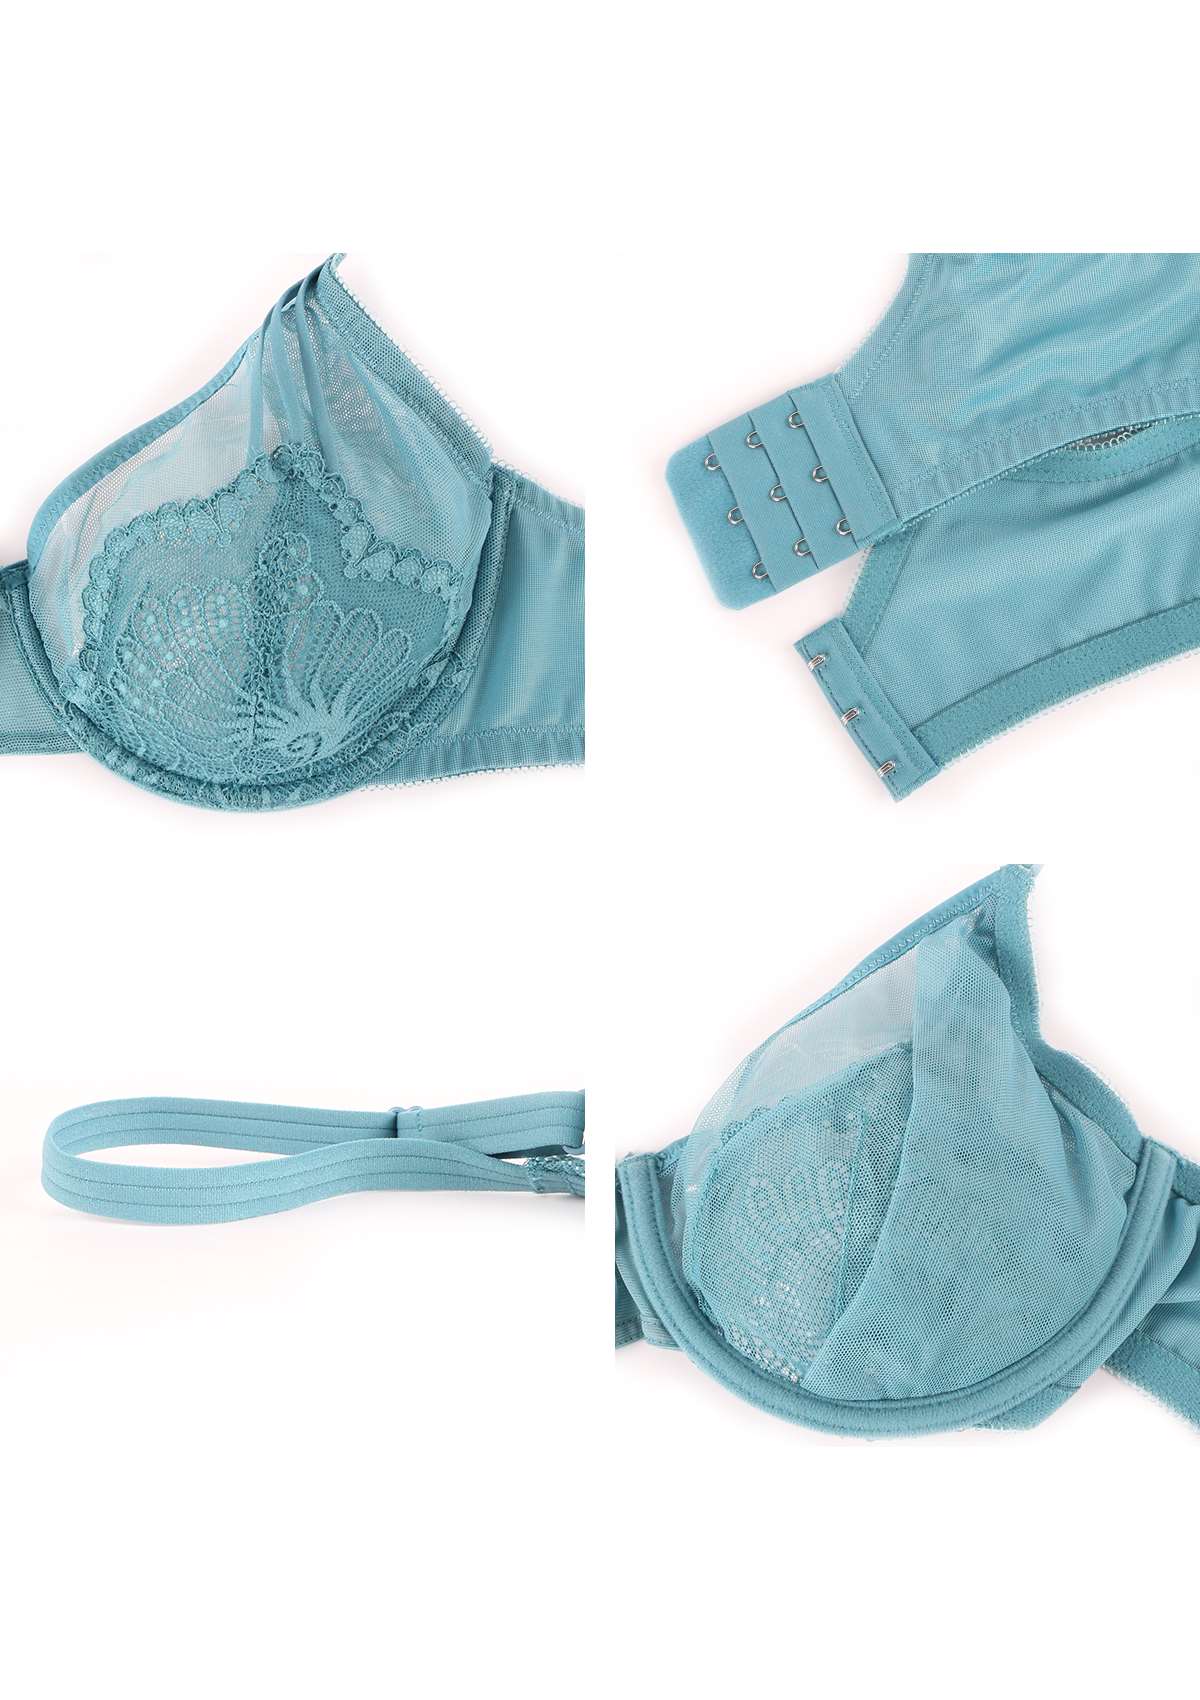 HSIA Sexy Floral Lace Minimizer Bra - Crystal Blue / 34 / D